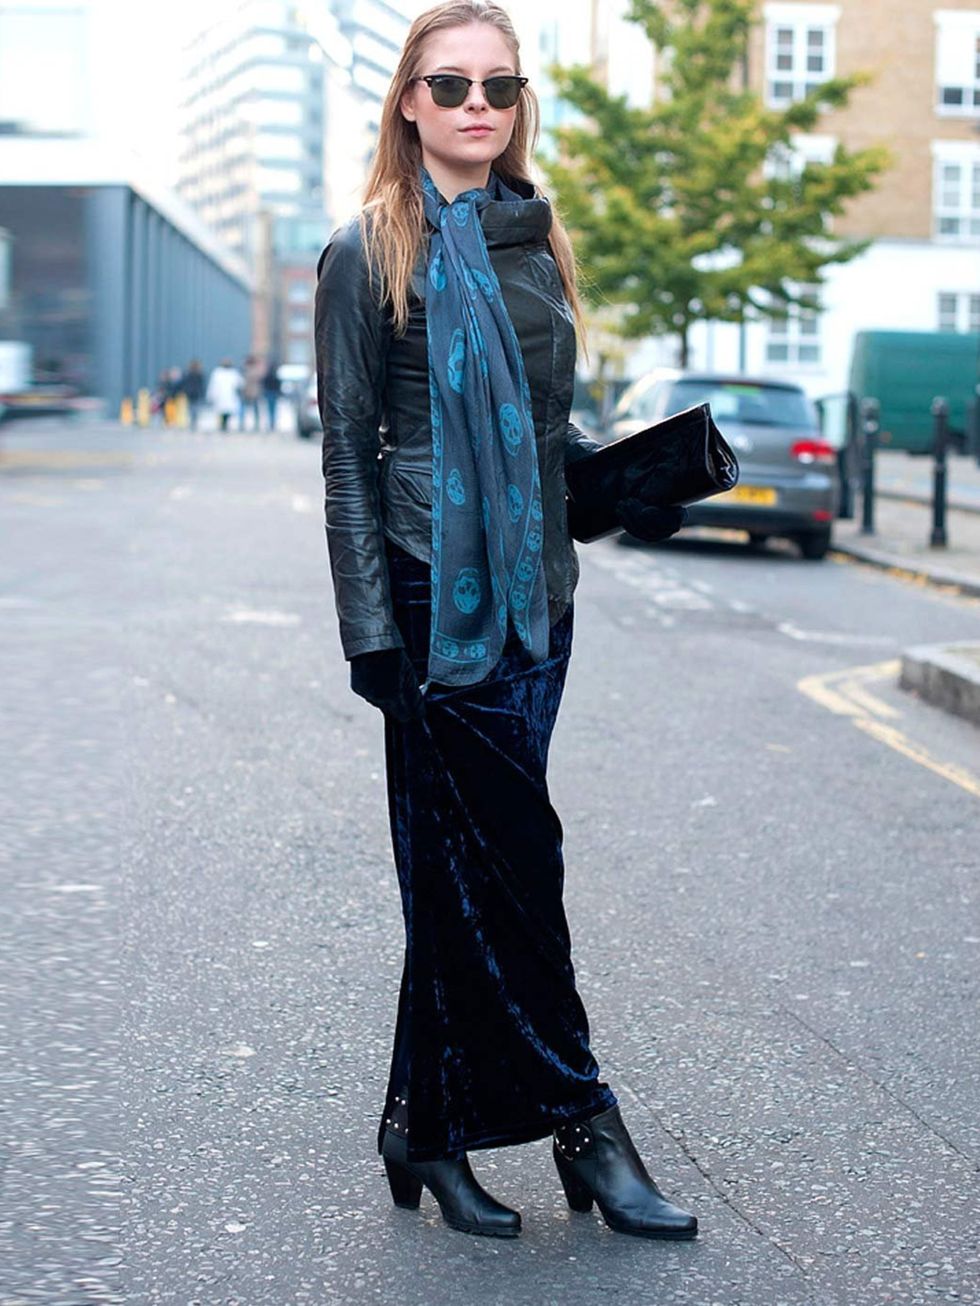 <p>Olivia, 21, Fashion Student.All Saints jacket, Asos skirt, Walter Steiger boots and bag, Alexander Mcqueen scarf.</p>